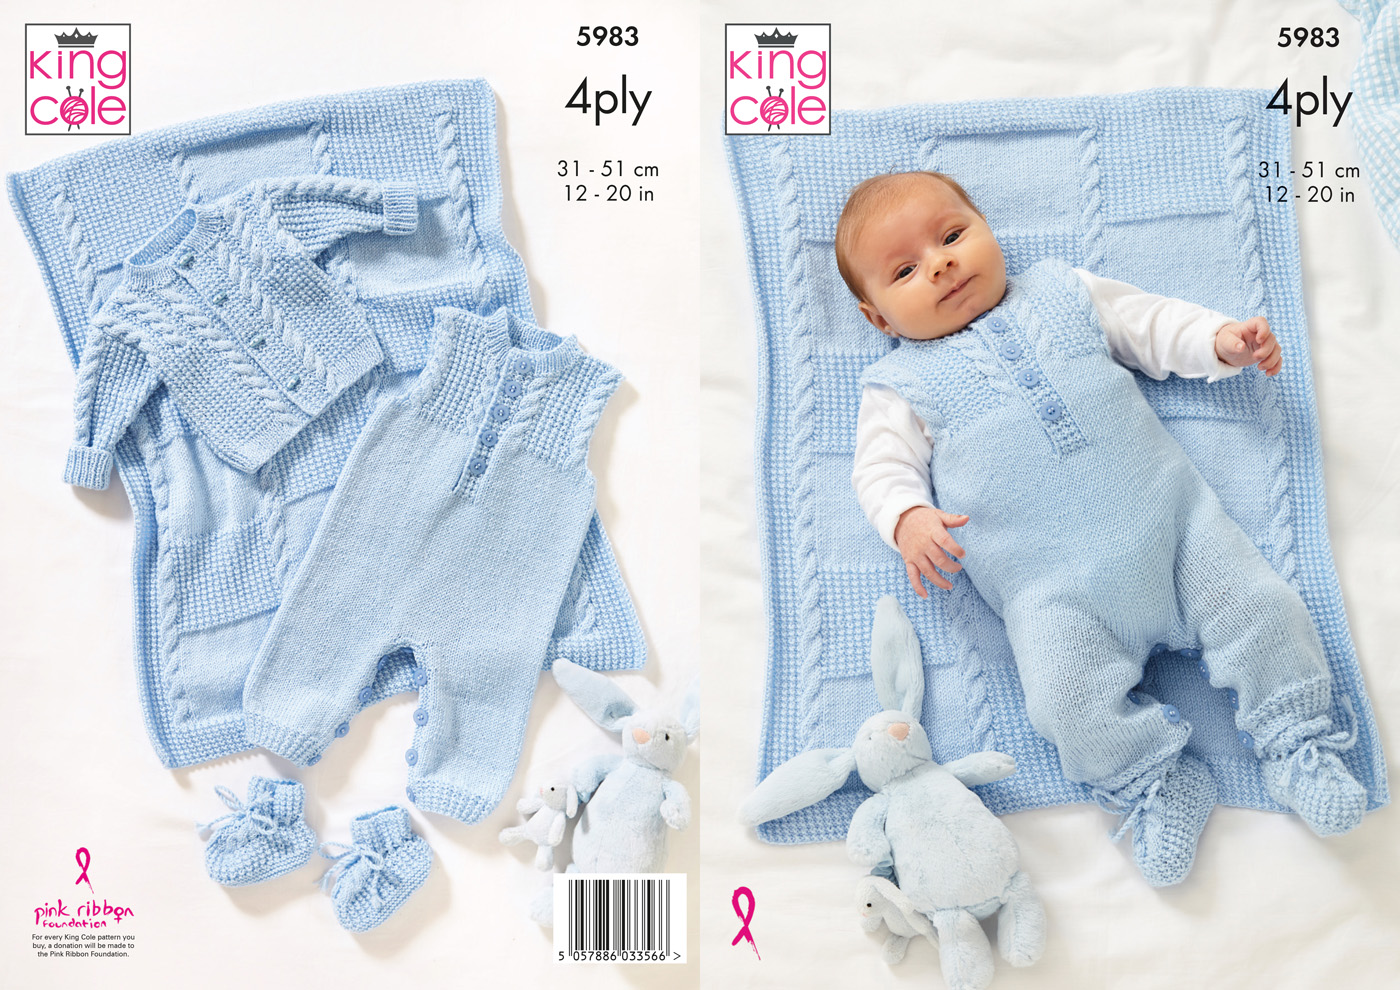 Jacket, Dungarees, Bootees & Blanket Knitted in Cherished 4Ply Pattern 5983